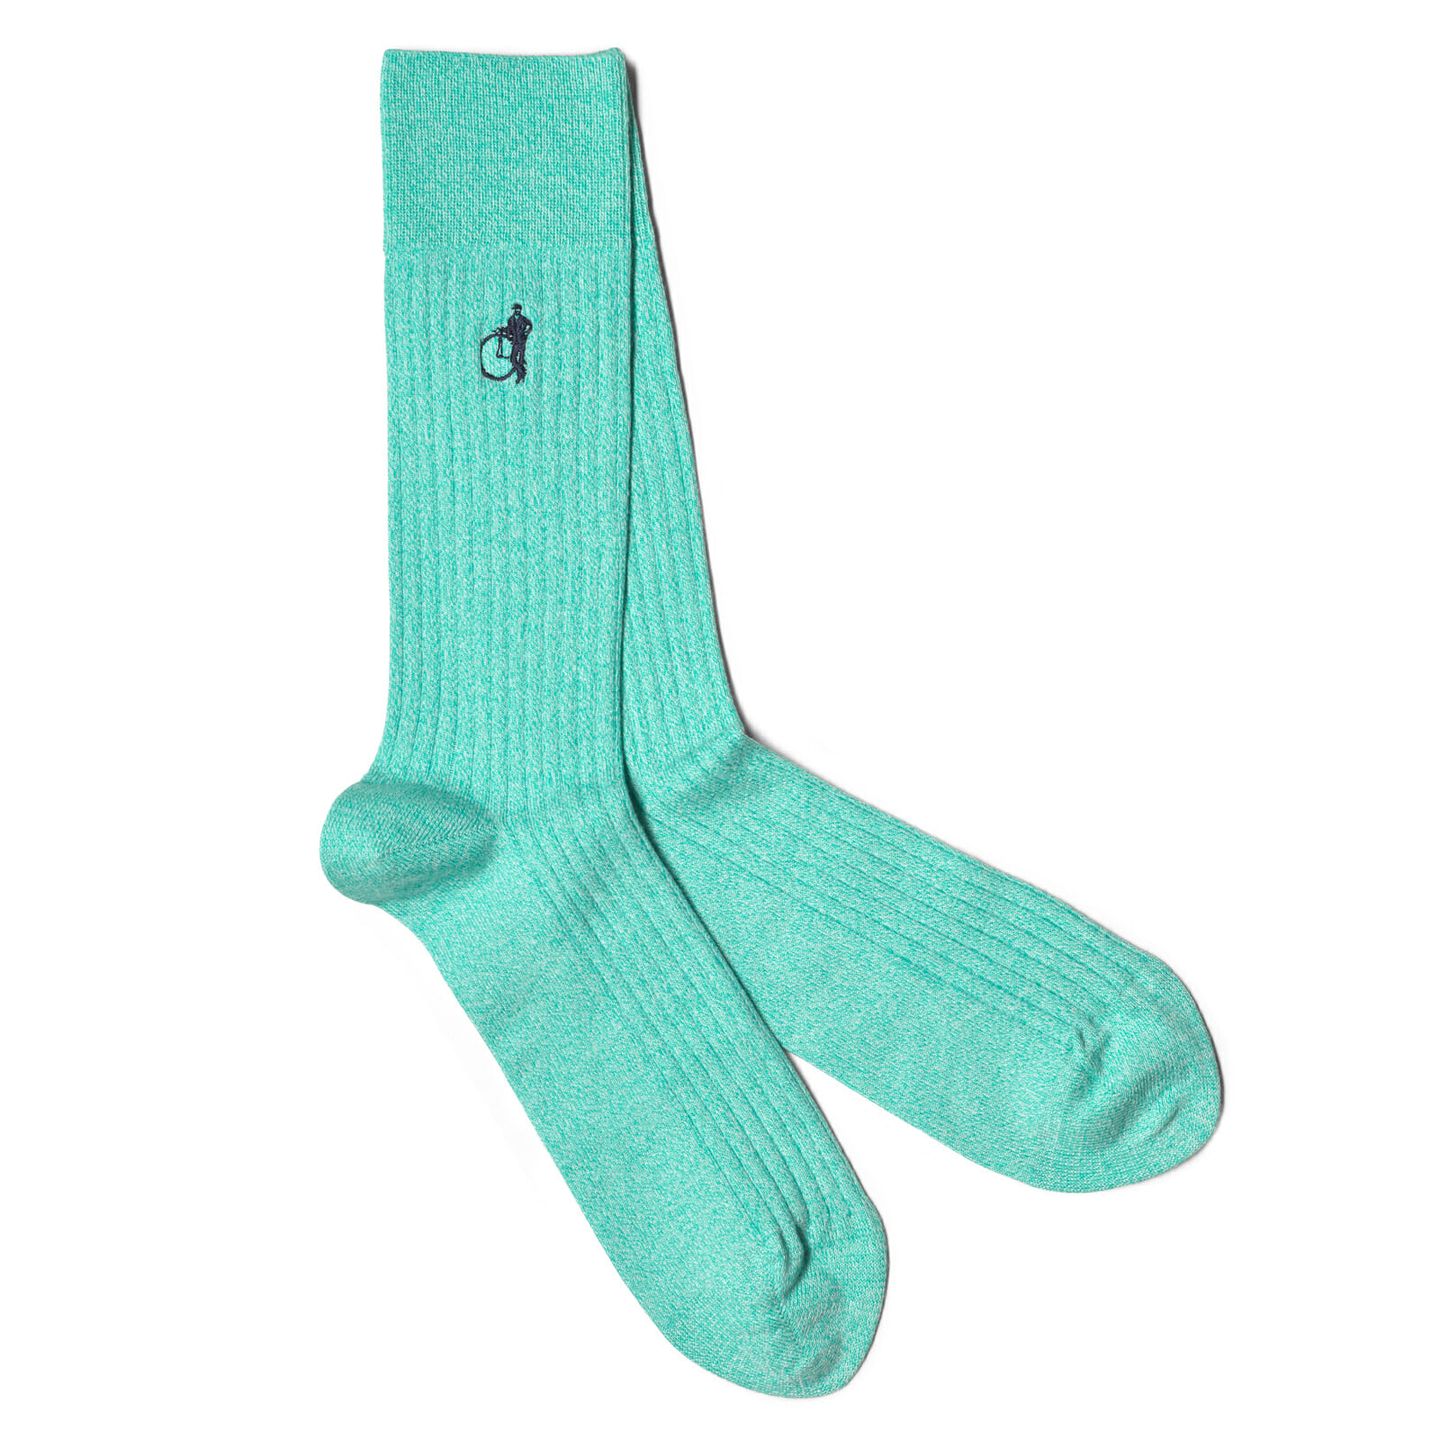 2 pair of light blue socks with a white background